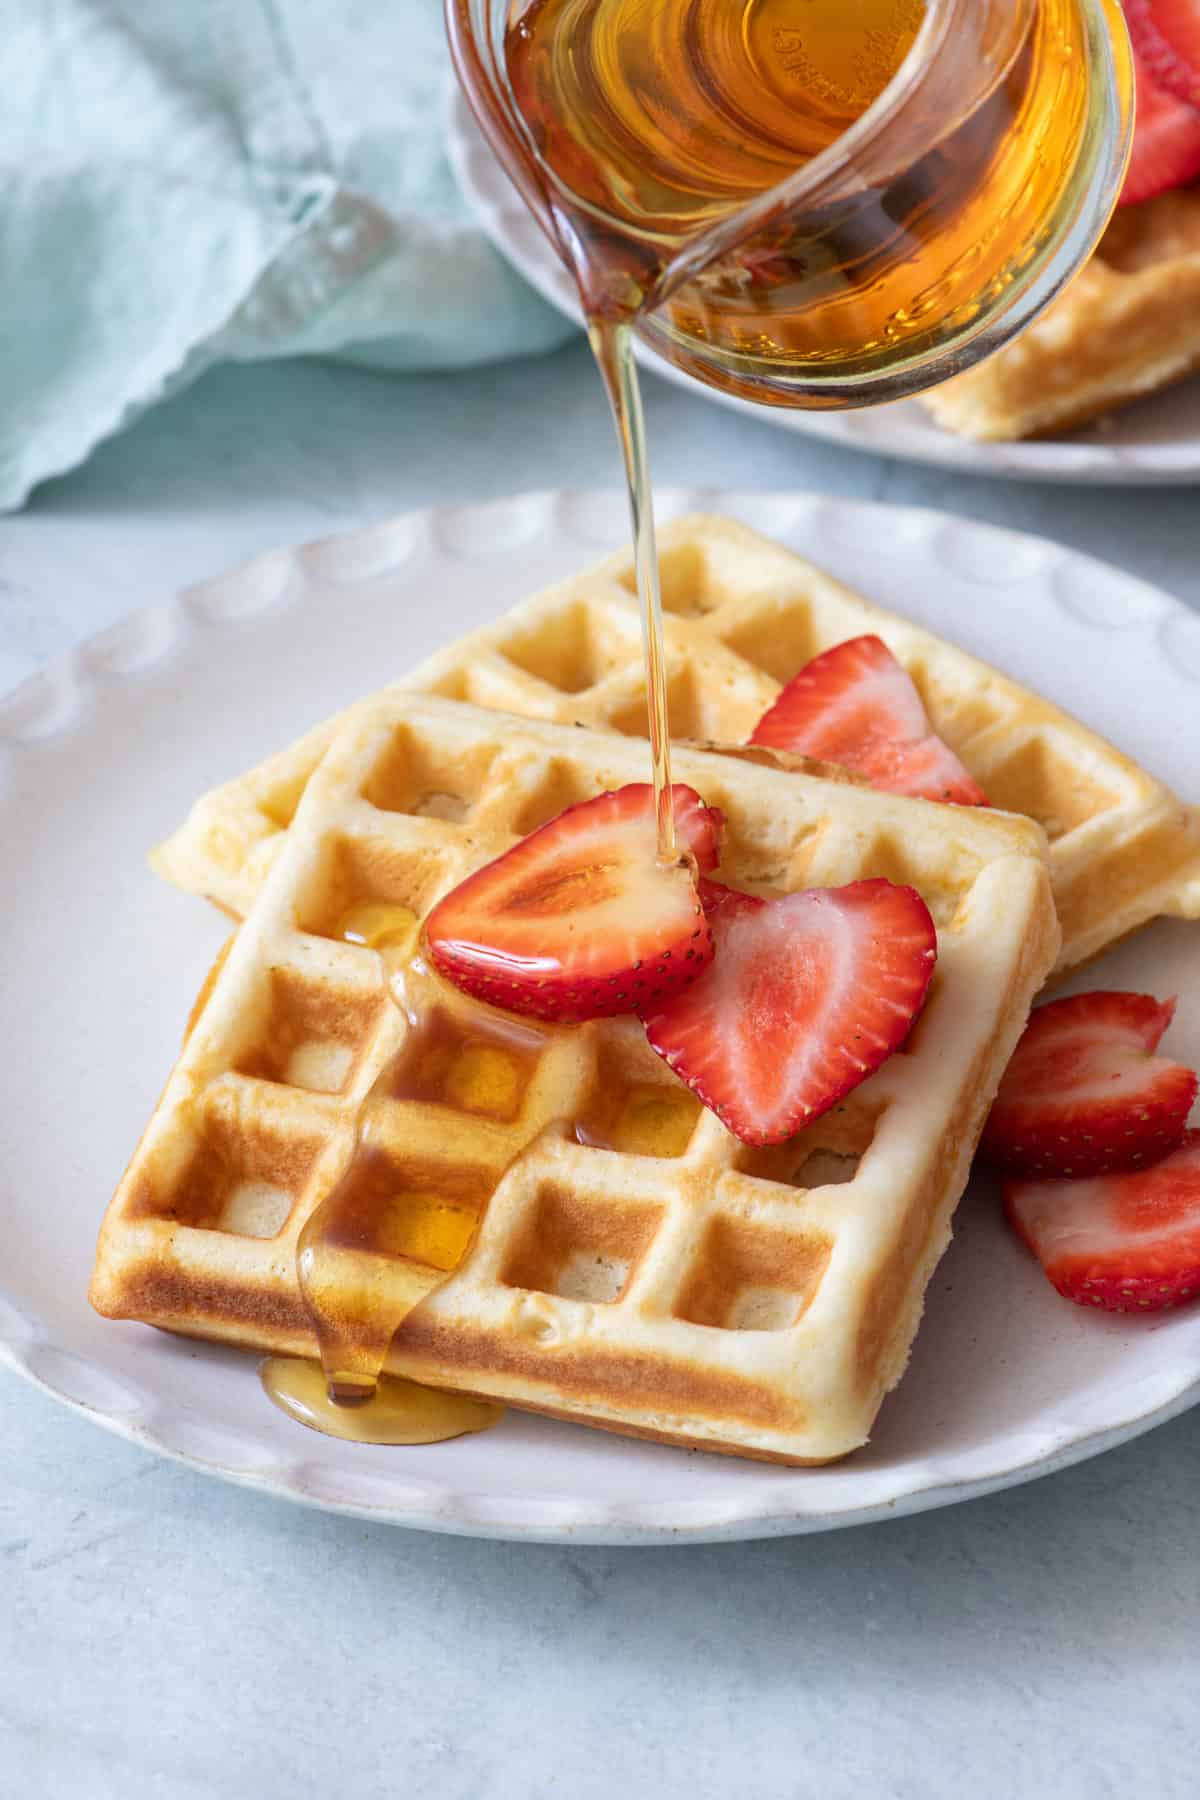 Plate of homemade waffles with slices of strawberries and maple syrup being poured on top in a glass carafe.